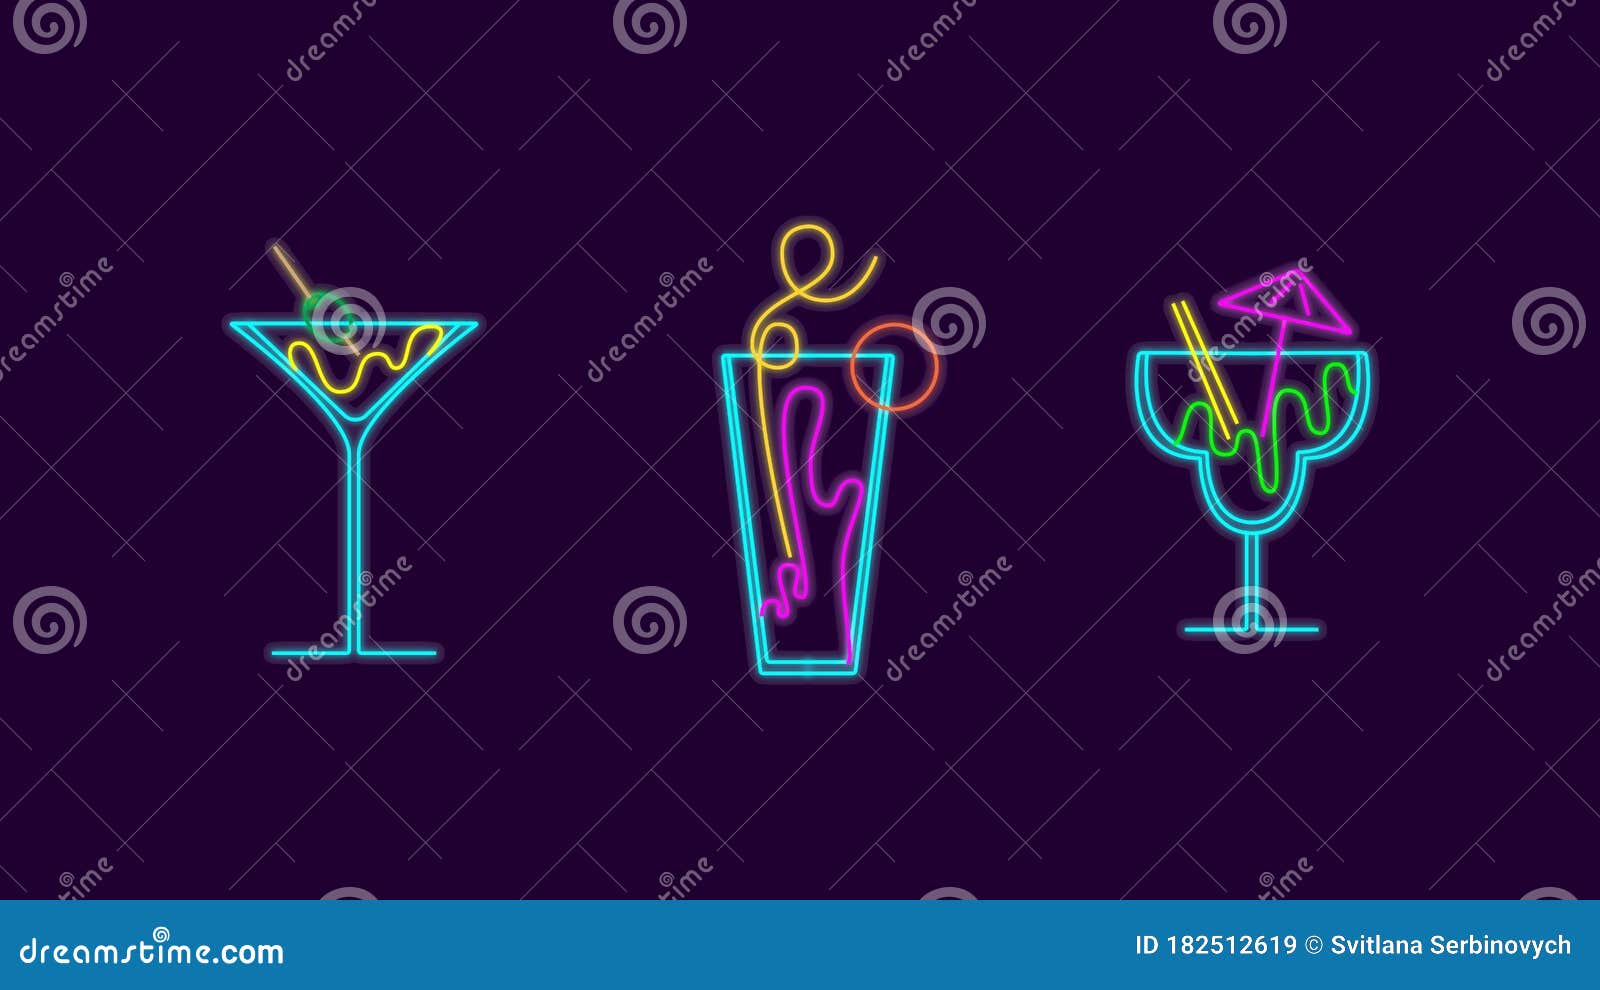 Neon Alcohol Drinks Signs Vector Isolated on Dark Background. Neon ...